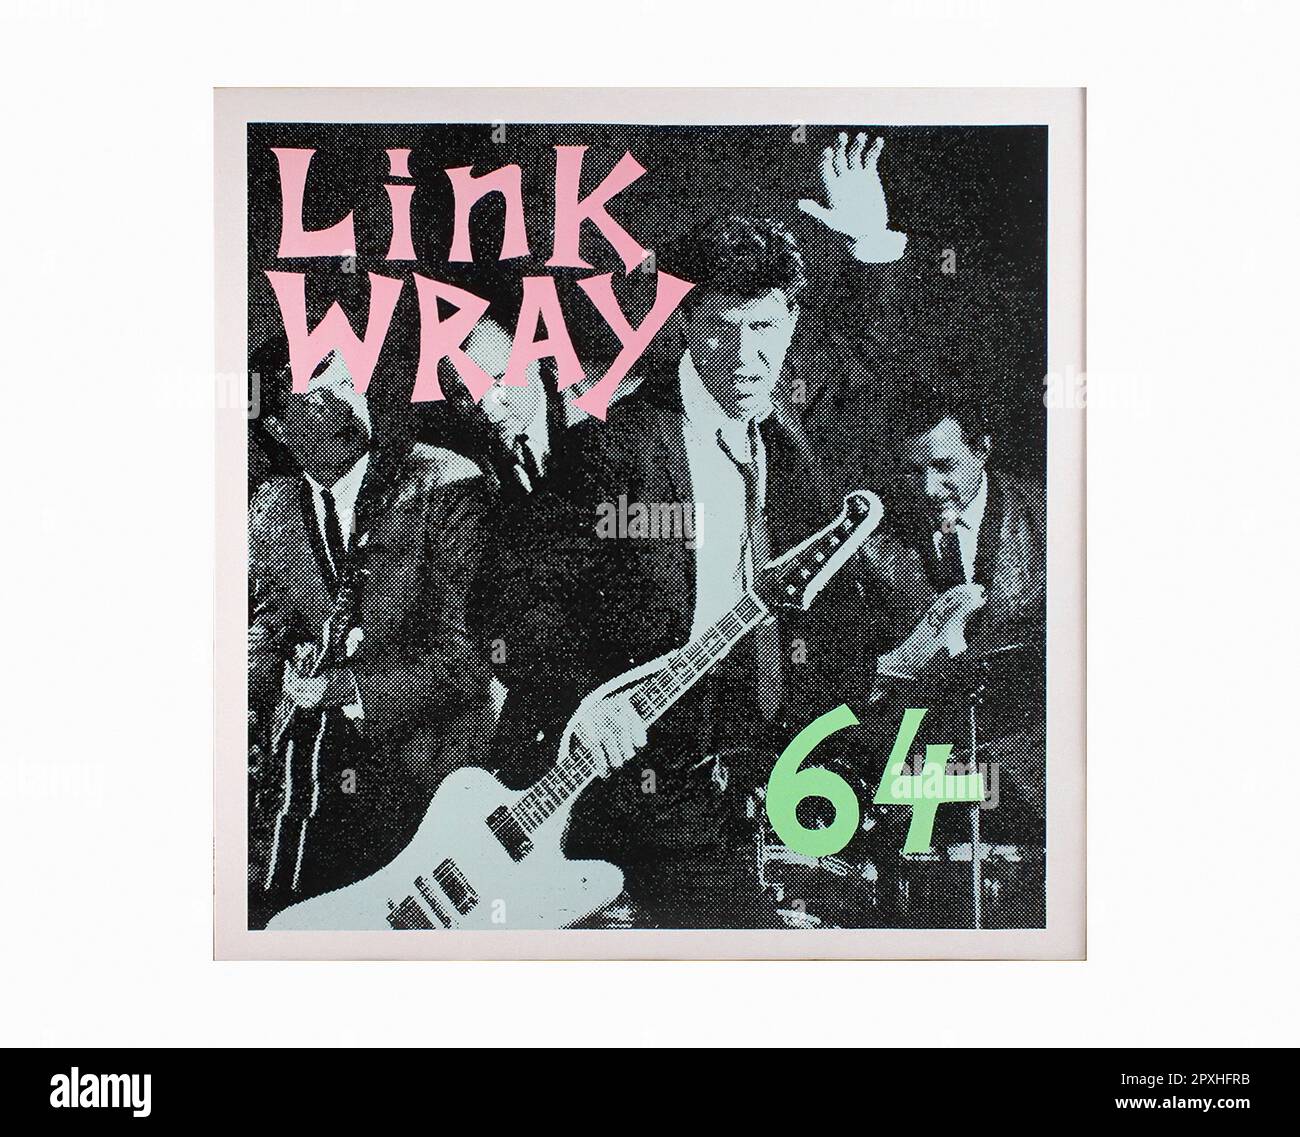 Link Wray - The Swan Demos '64 (1989) - Vintage Vinyl Record Sleeve Banque D'Images